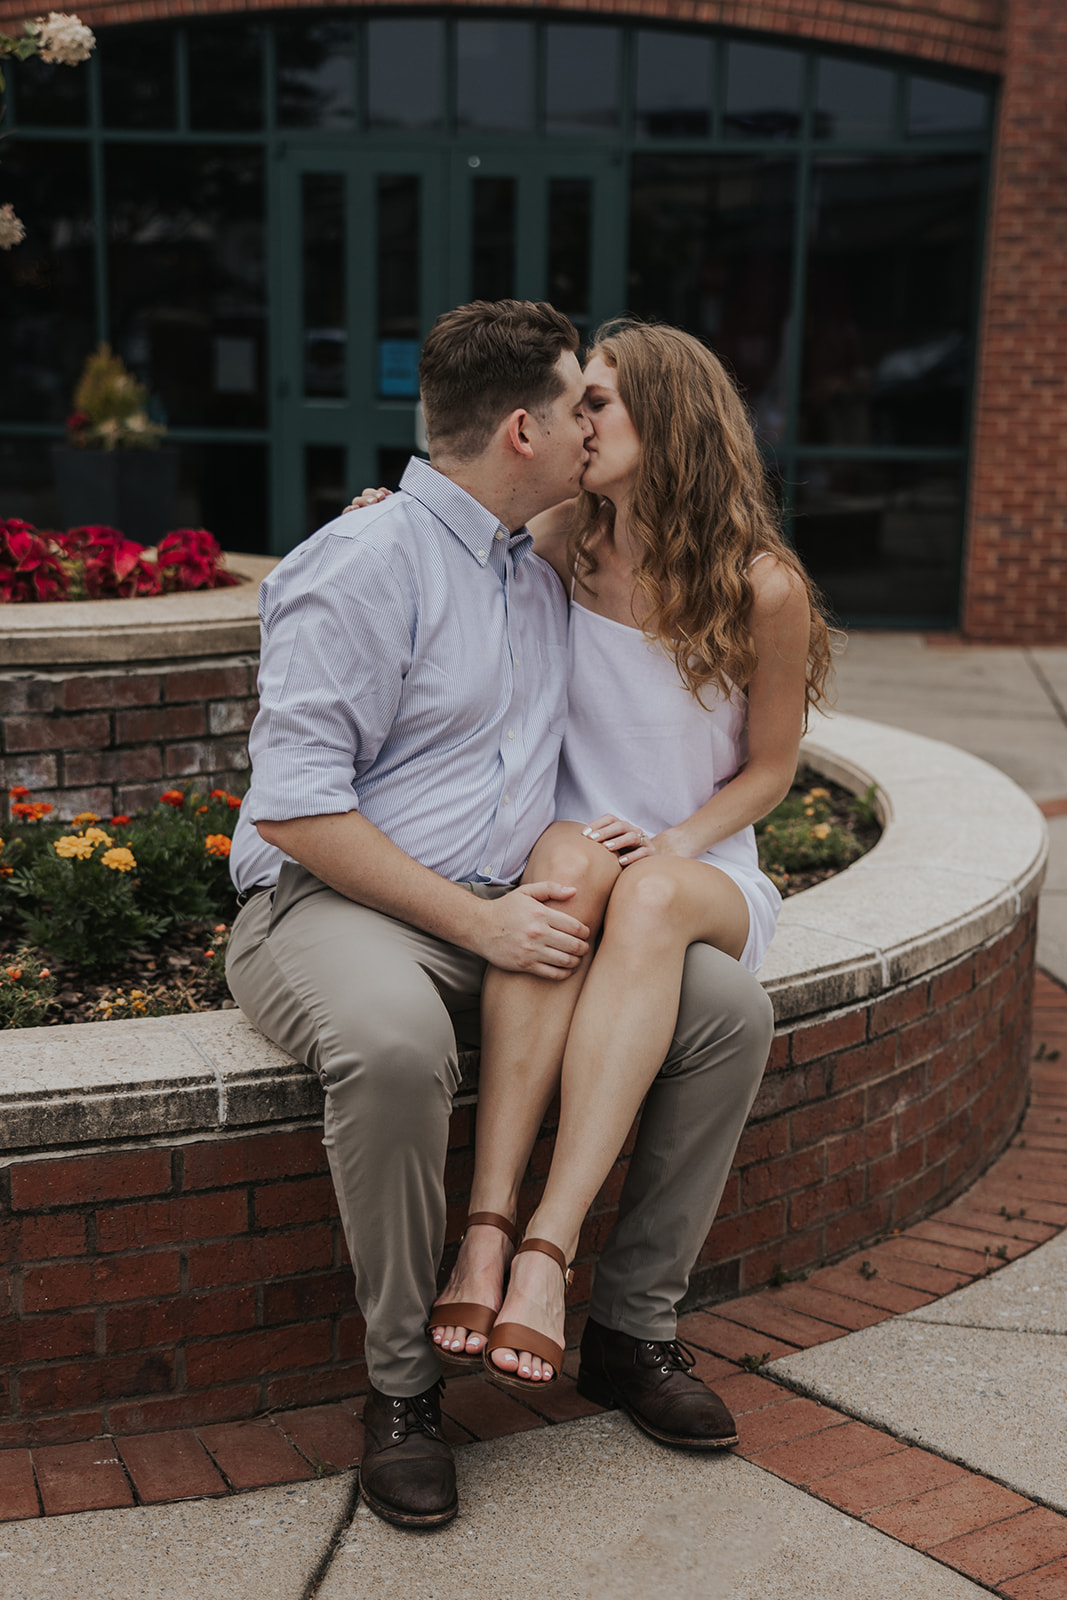 Beautiful couple sit together on an edge with yellow and red flowers in the background. A simple and easily replicated cute couple photo idea!